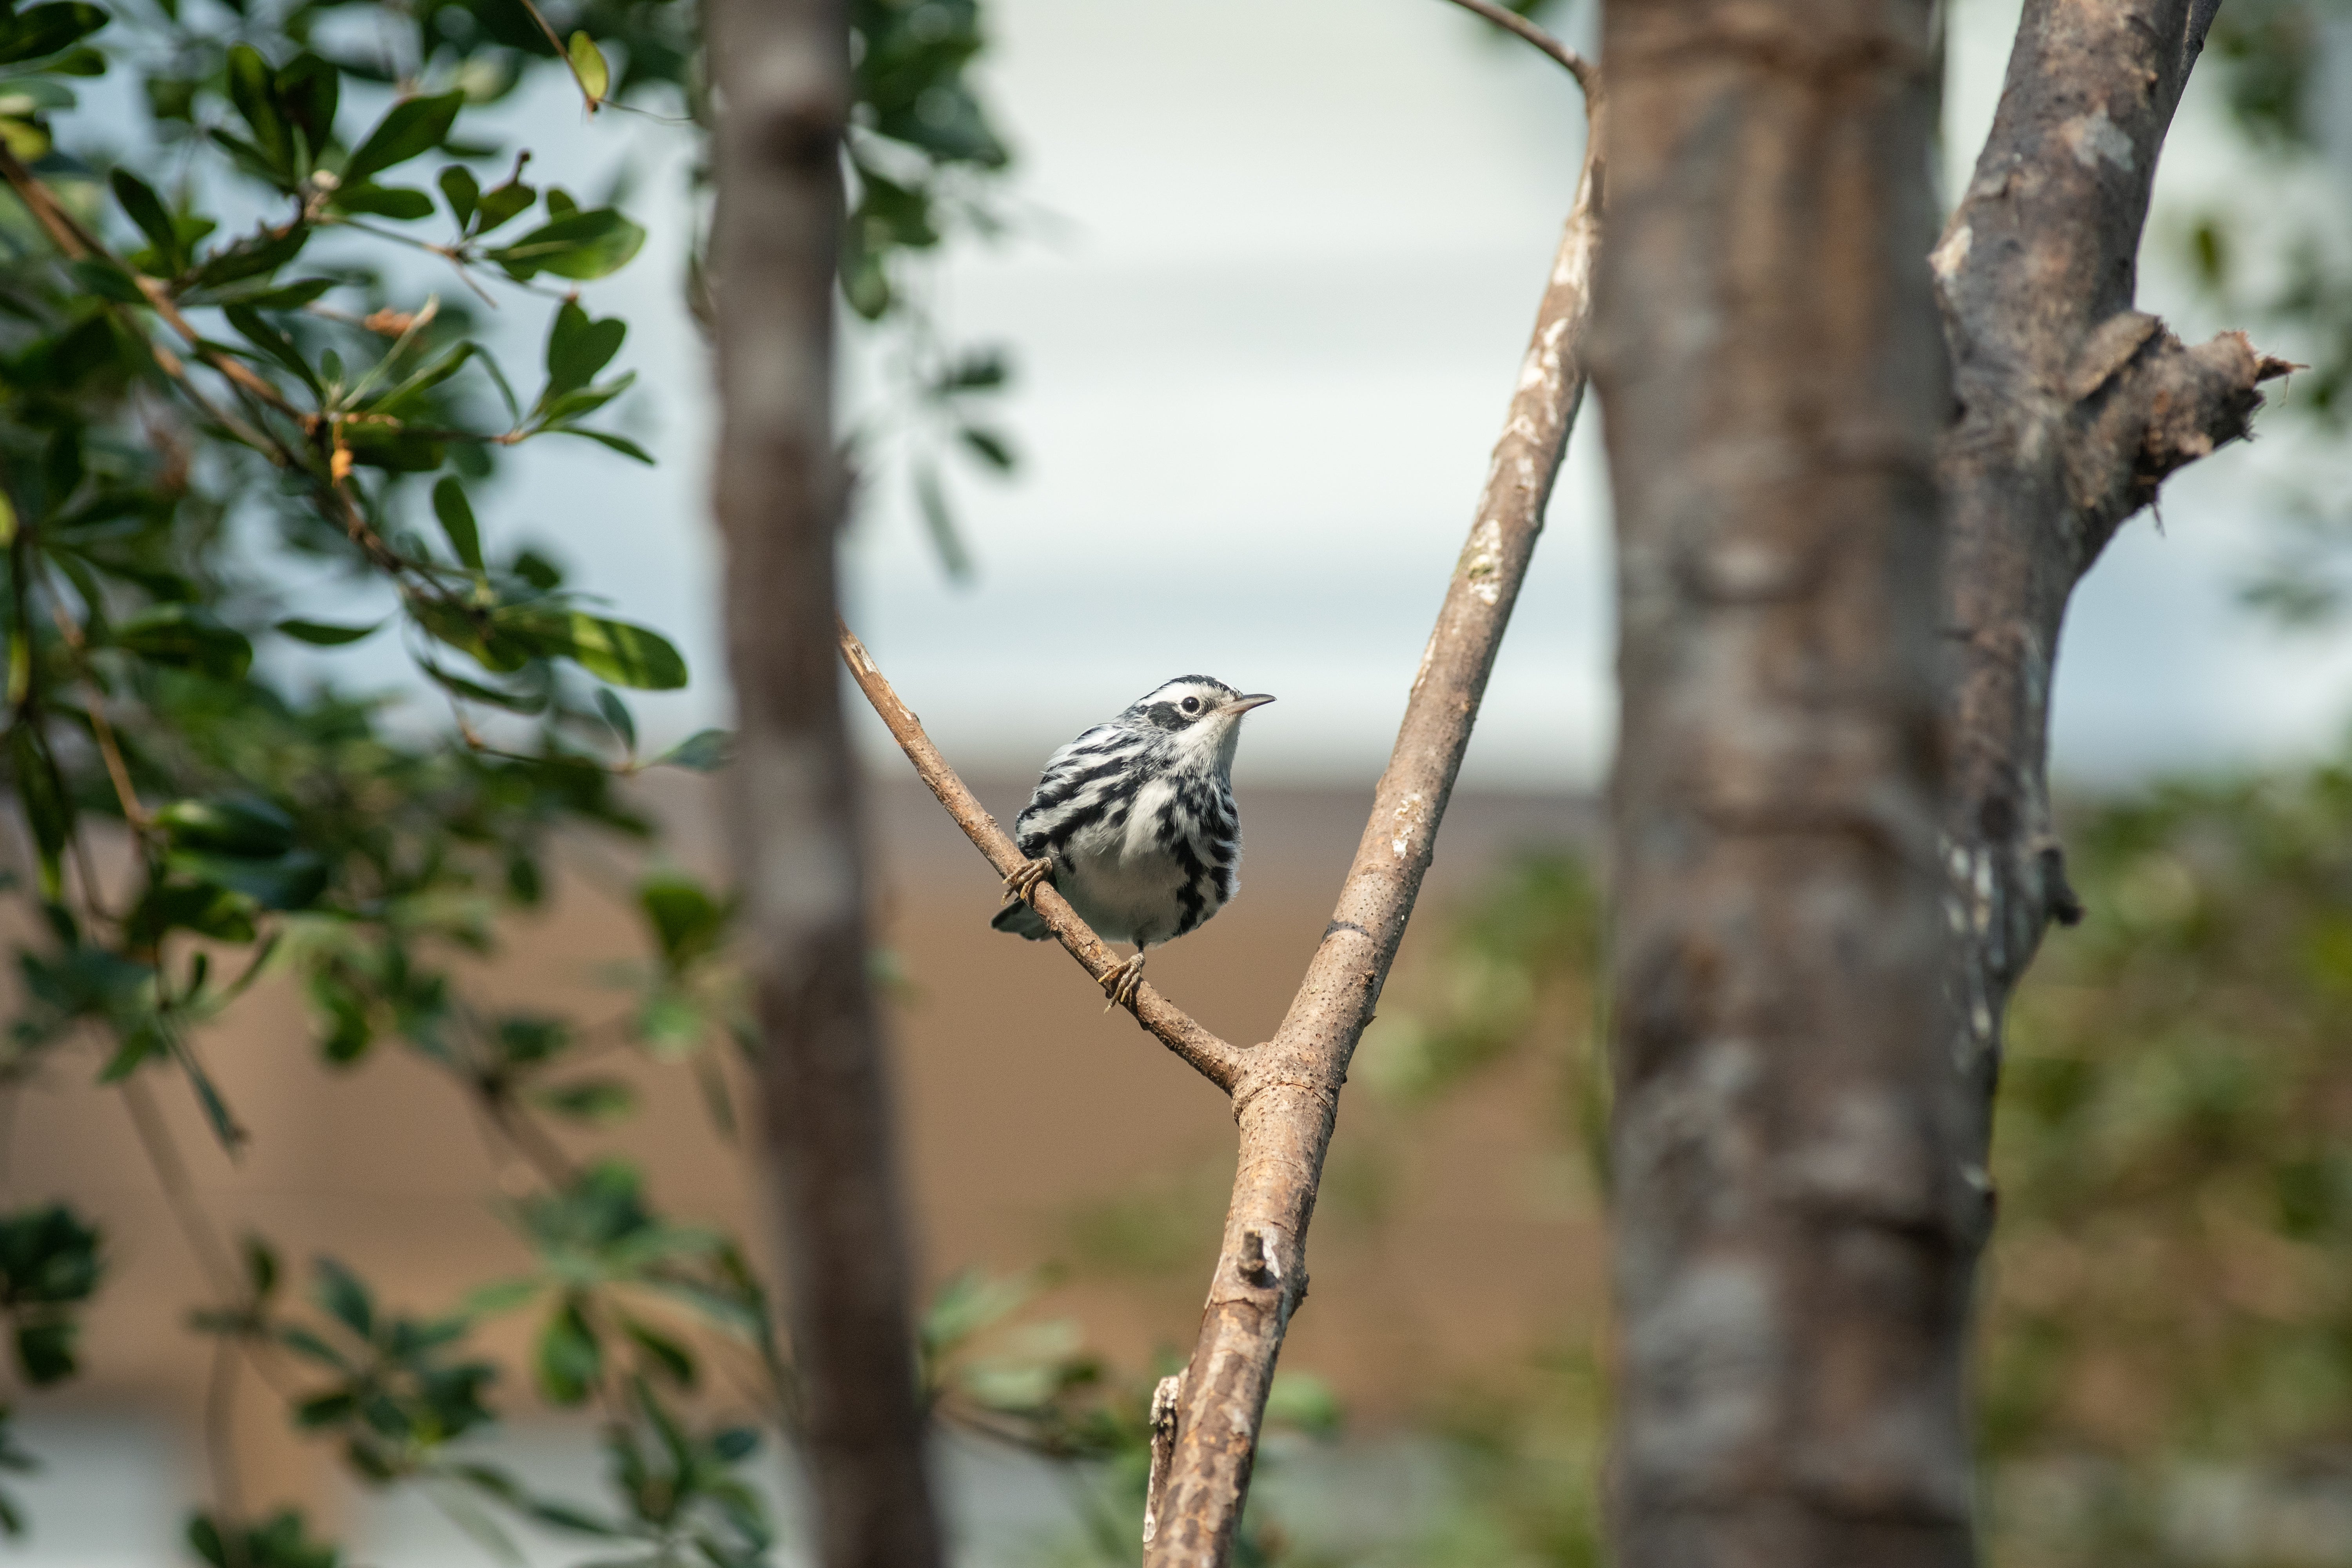 A black-and-white warbler rests on a tree branch in the Bird House.